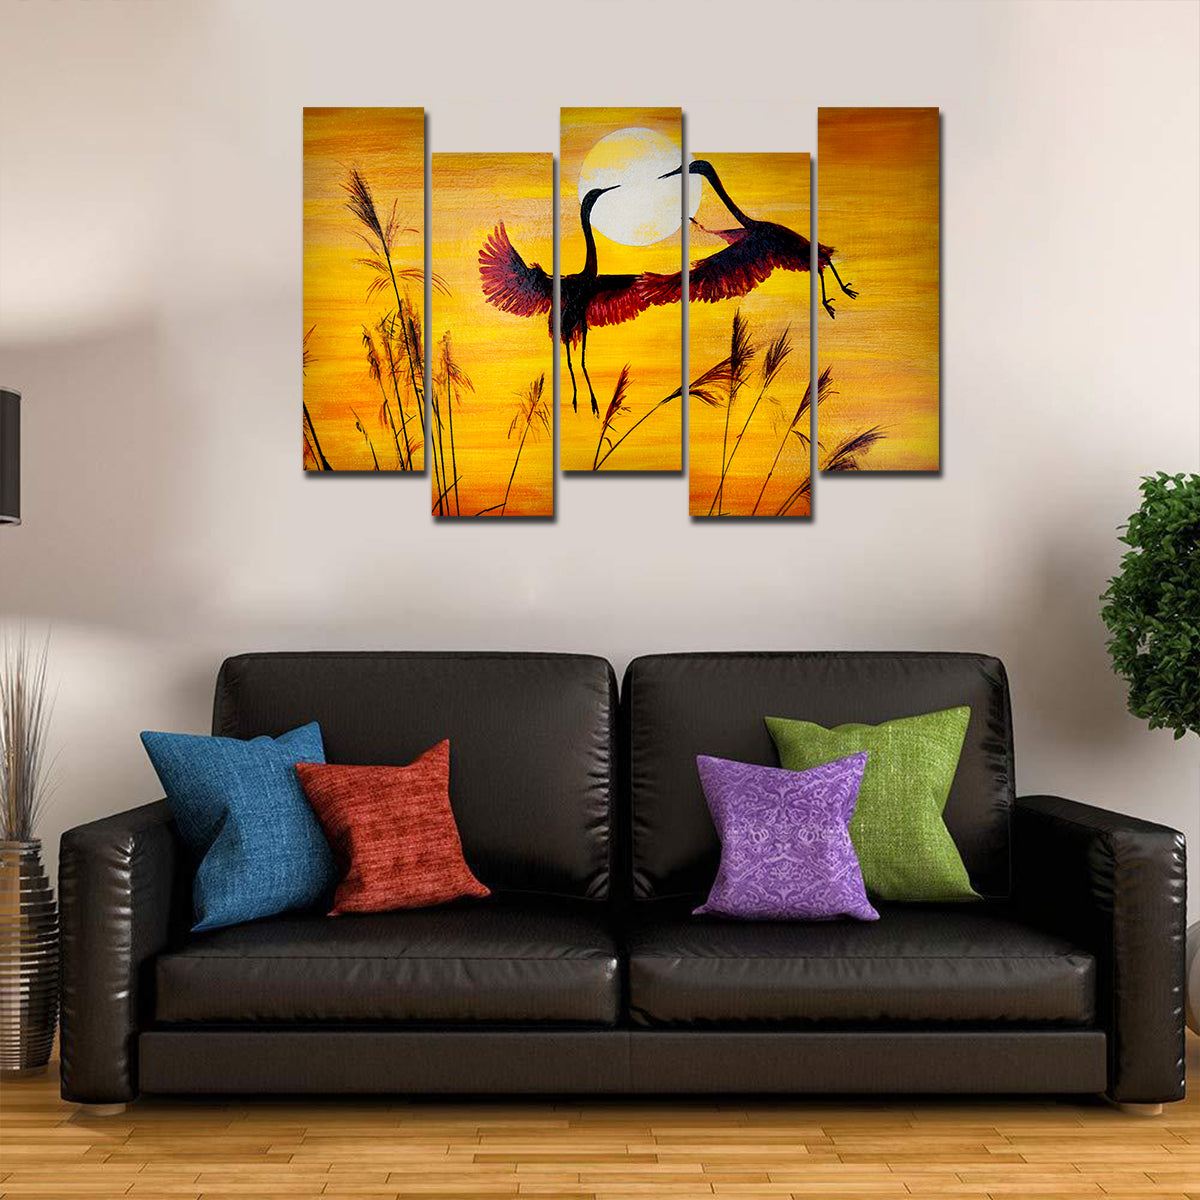 Pair of Cranes Flying 5 Pieces Canvas Wall Painting